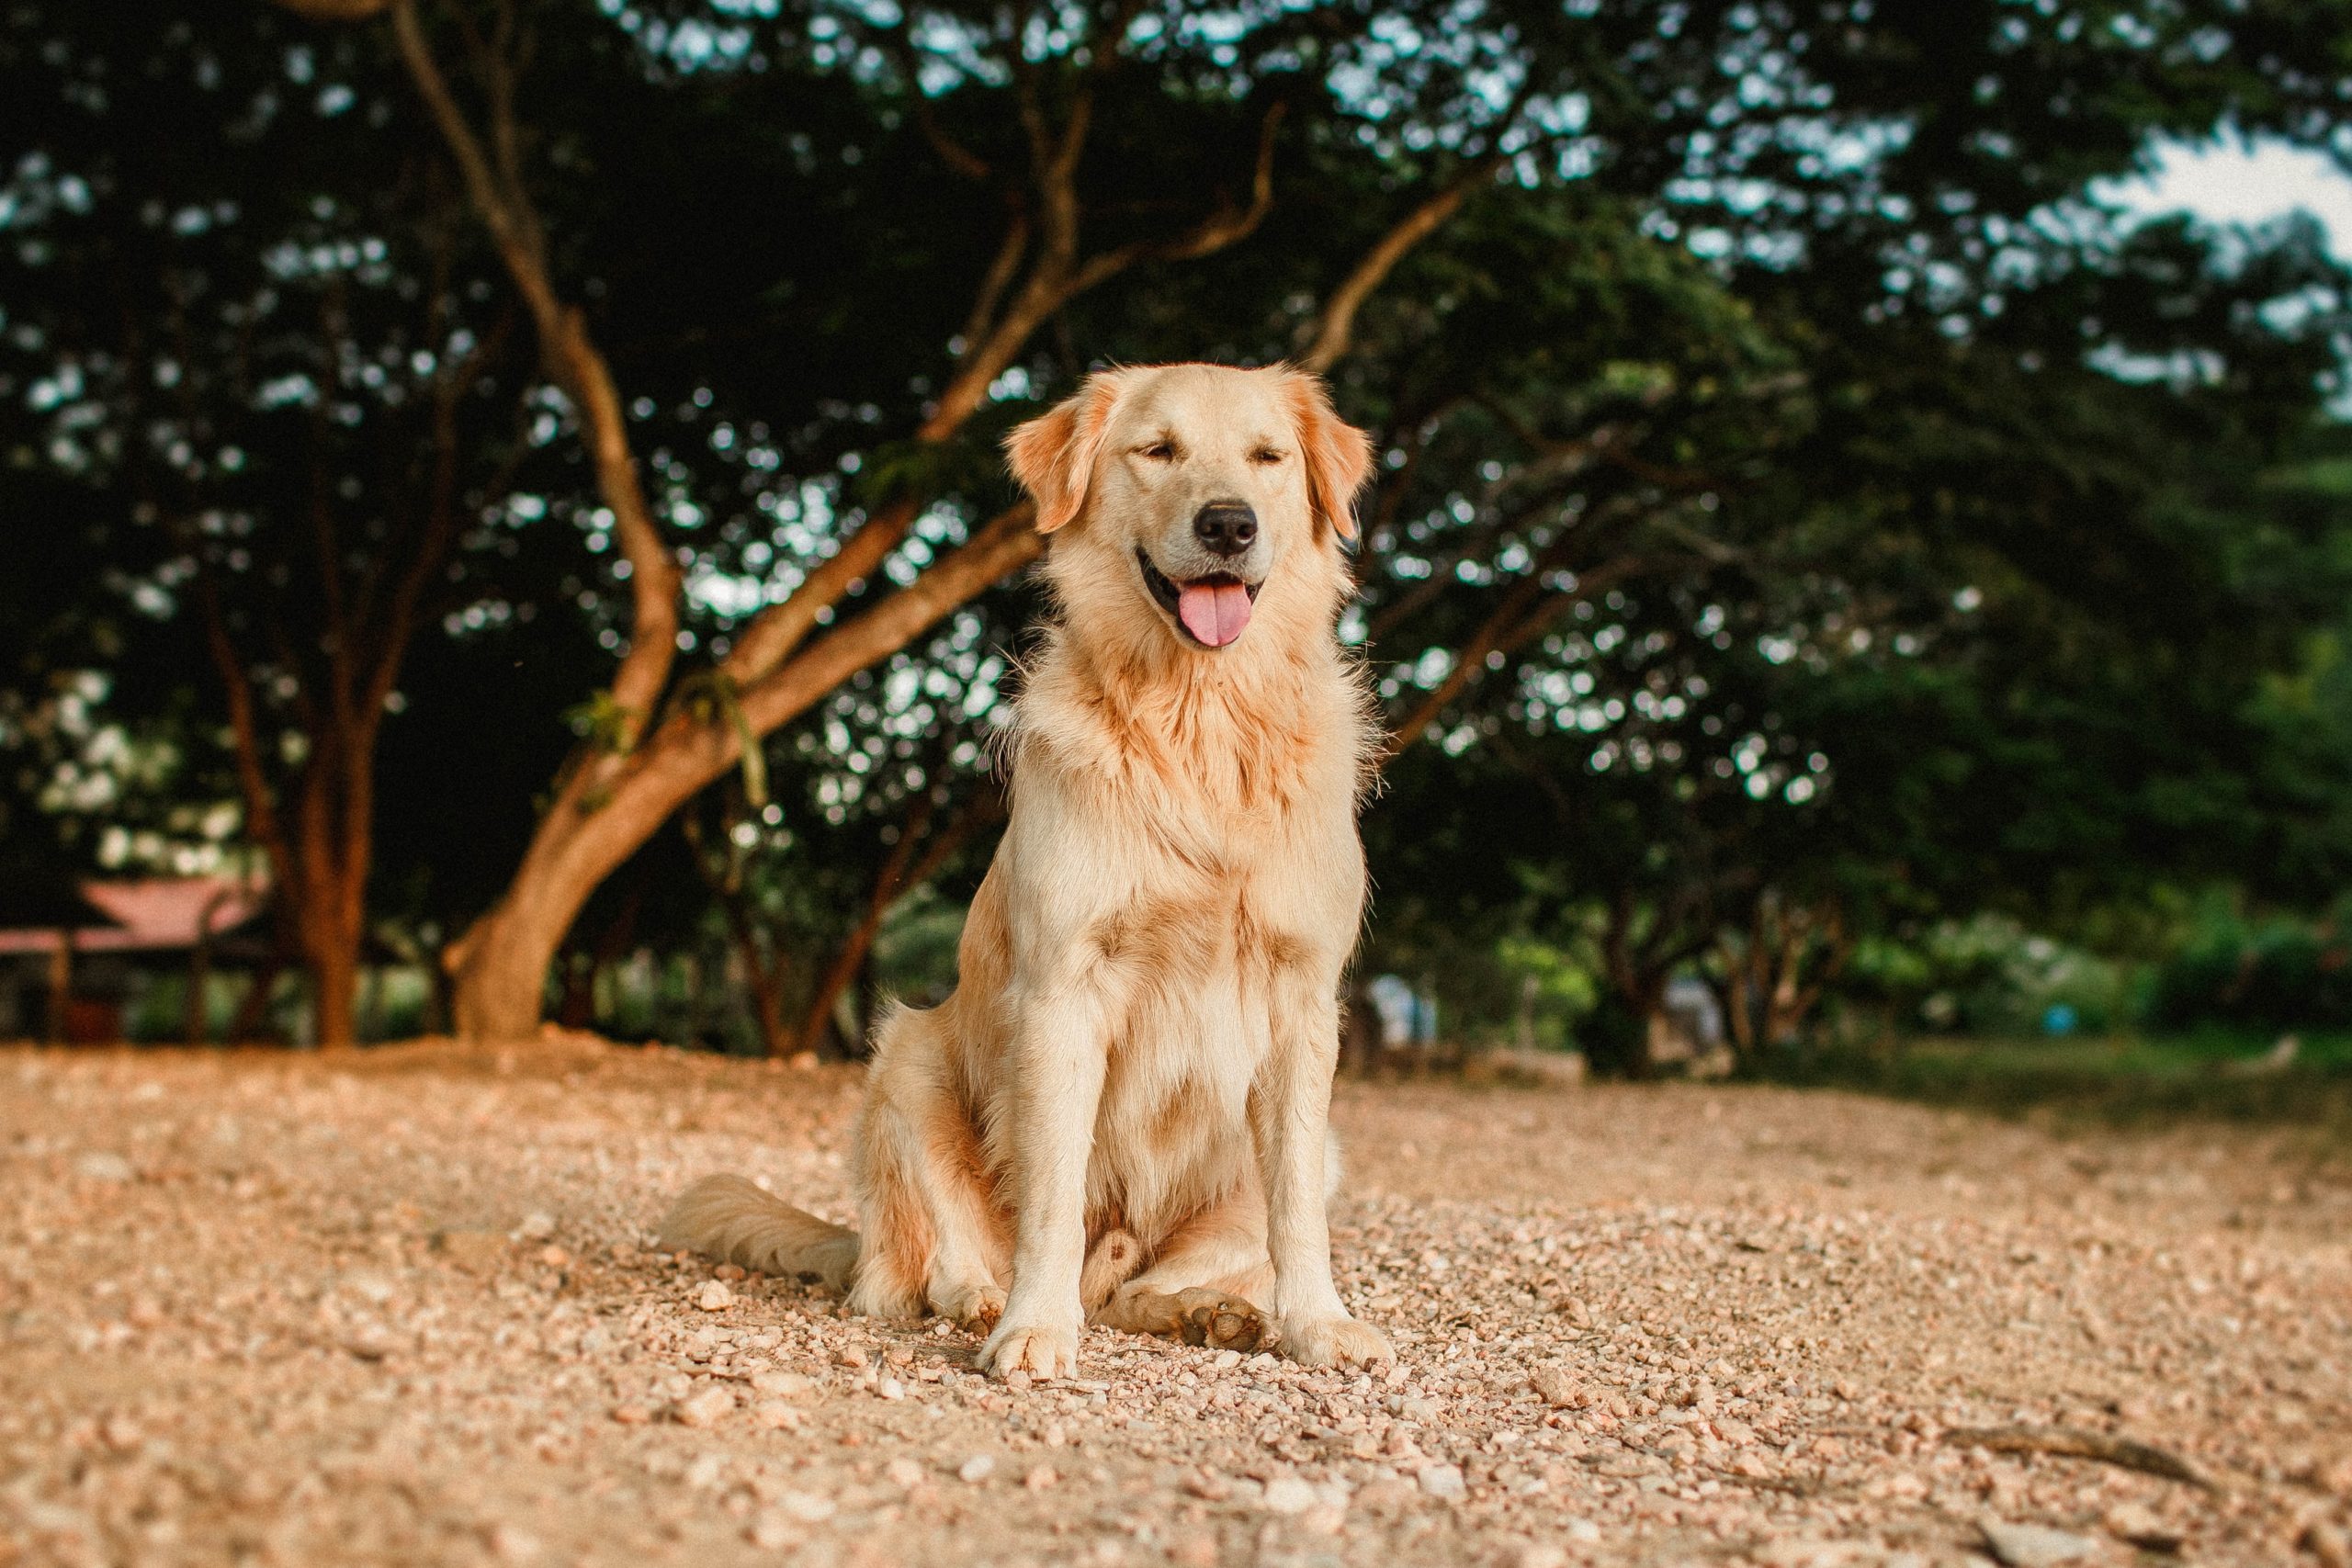 Spaying and Neutering Golden Retrievers: Things We Should ...